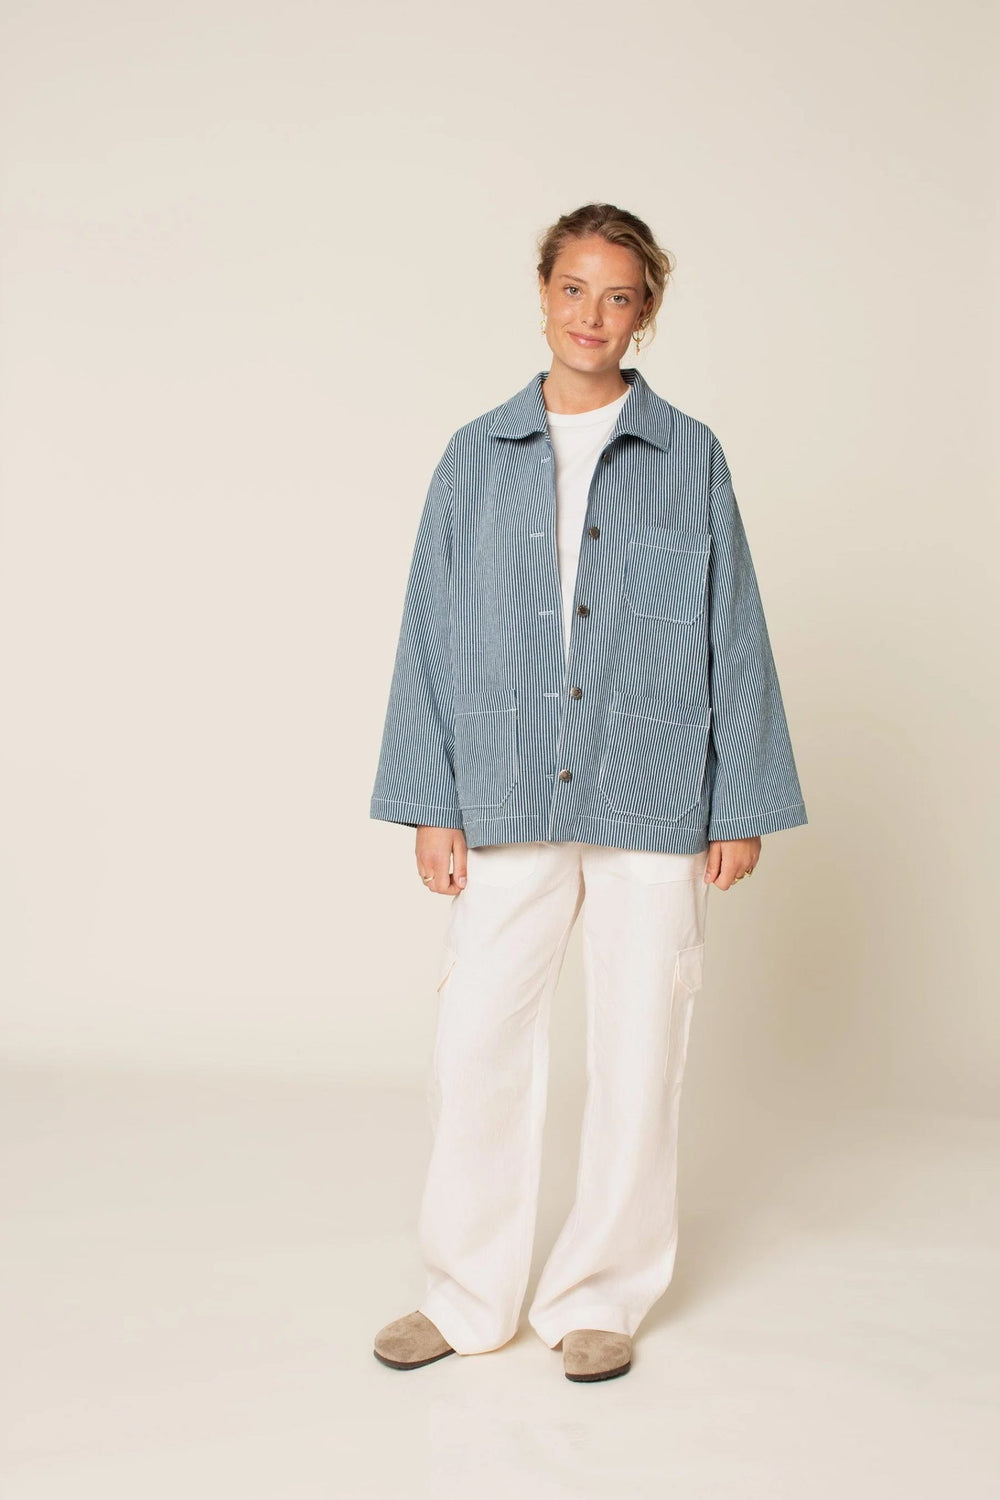 Woman wearing the Unisex Painter Jacket sewing pattern from Wardrobe by Me on The Fold Line. A jacket pattern made in denim, cotton drill, linen or wool fabrics, featuring an oversized fit, dropped shoulders, large convertible collar, three patch pockets,